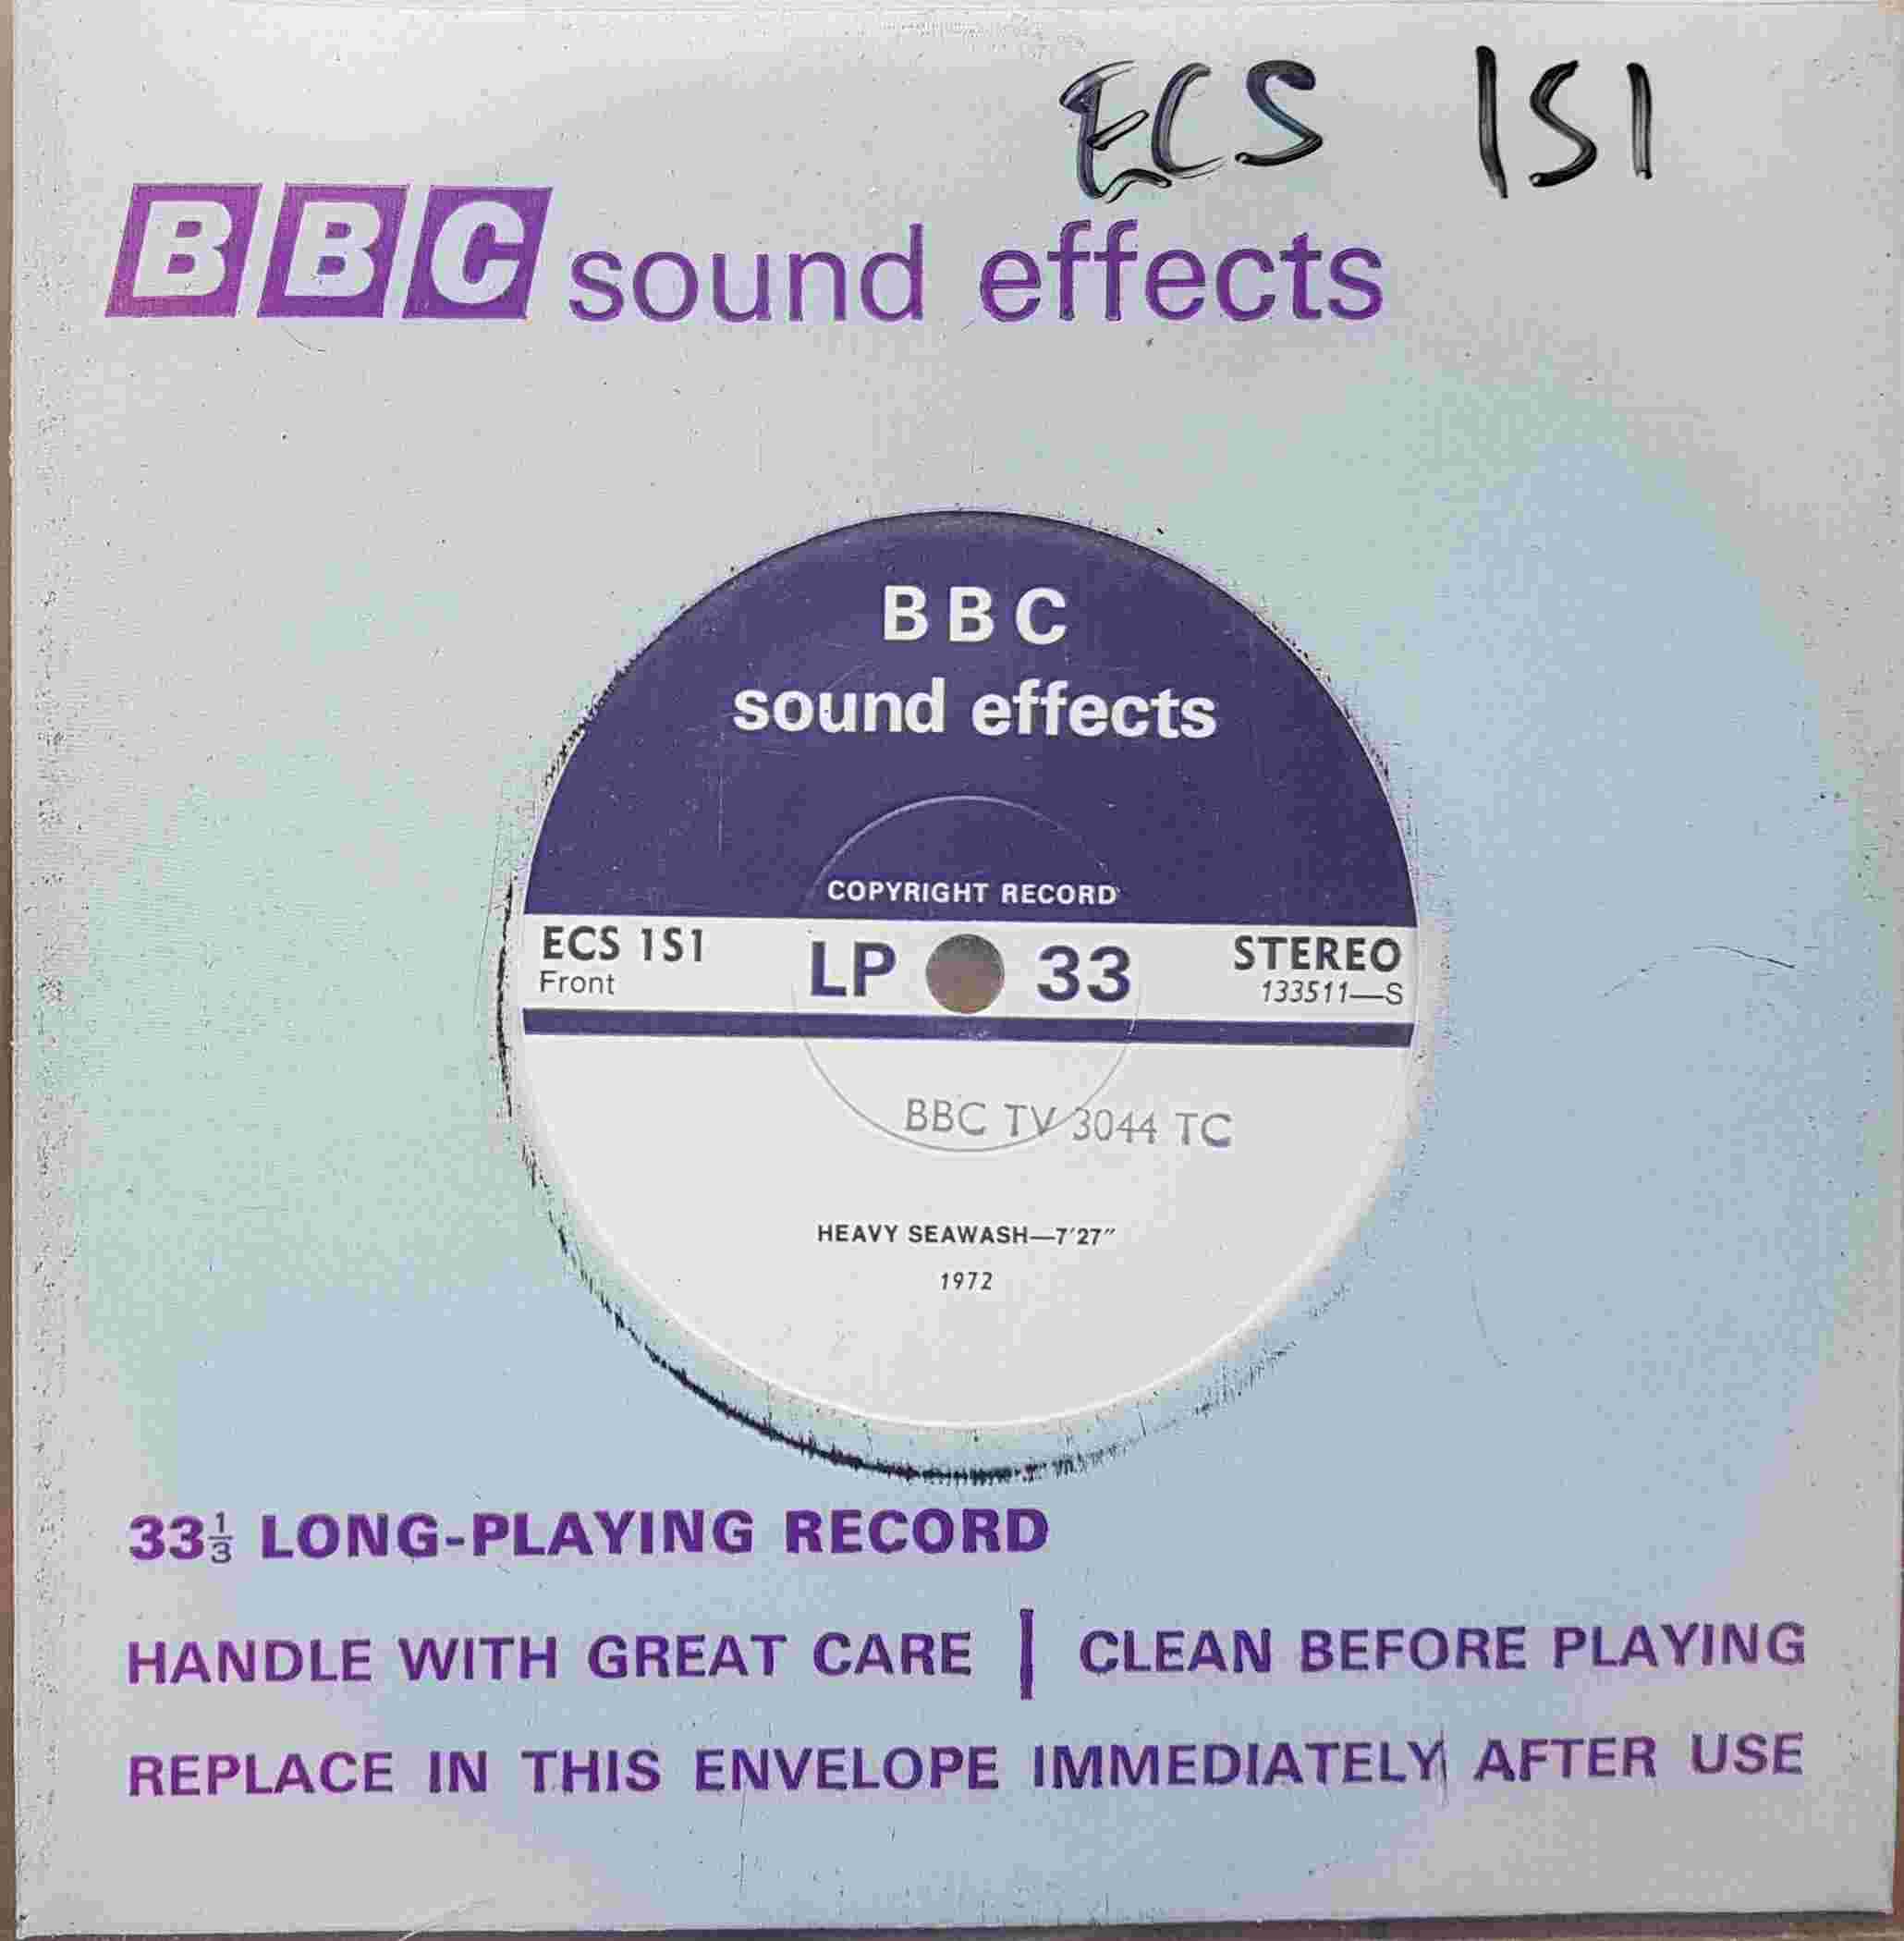 Picture of ECS 1S1 Seawash by artist Not registered from the BBC records and Tapes library